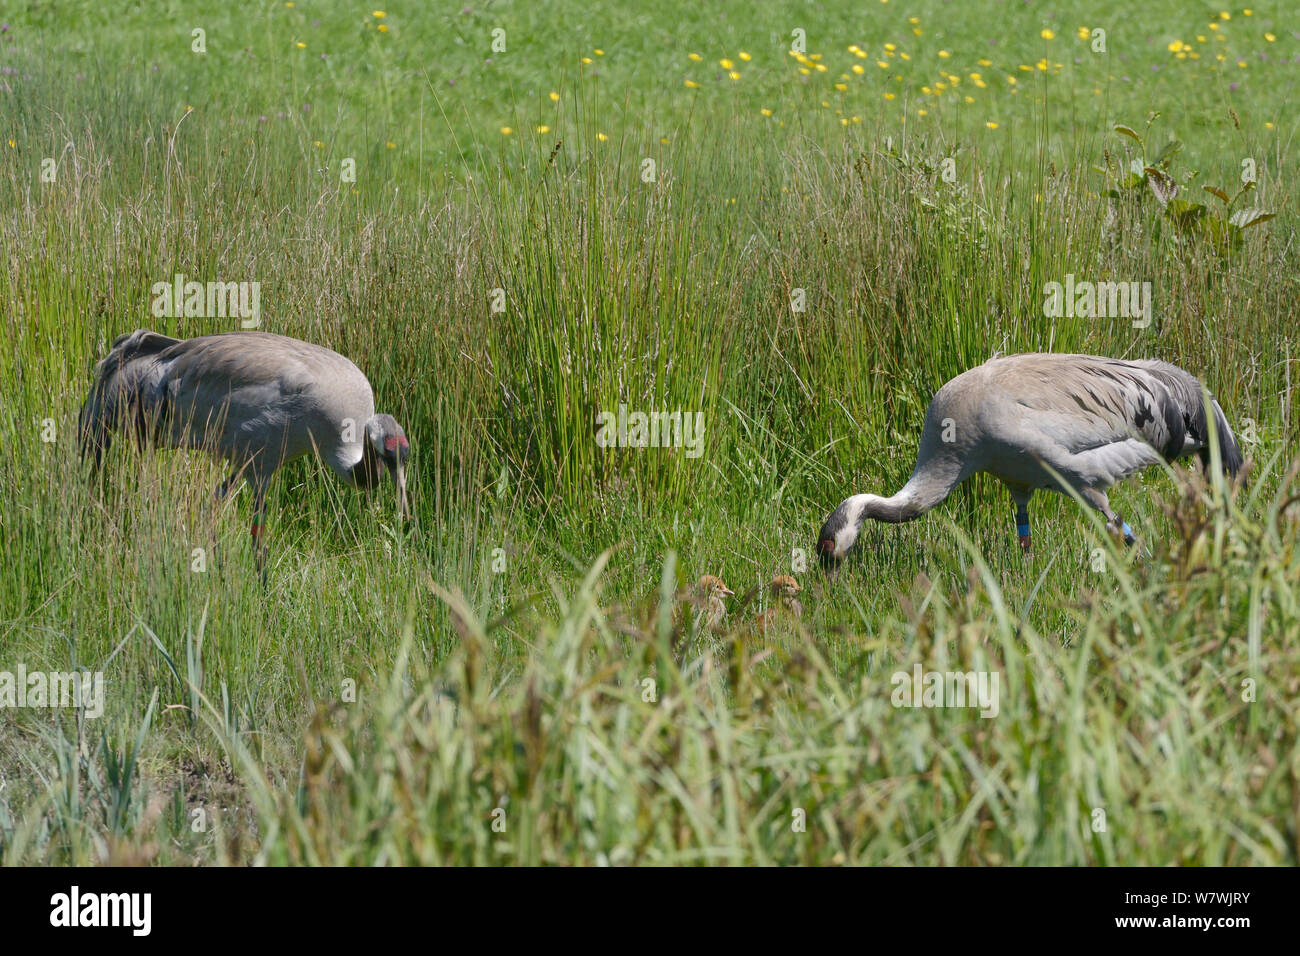 Common / Eurasian cranes (Grus grus) Monty and Chris, released by the Great Crane Project in 2010, foraging in a sedge marsh to feed their two 2 day chicks, Slimgridge, Gloucestershire, UK, May 2014. Stock Photo